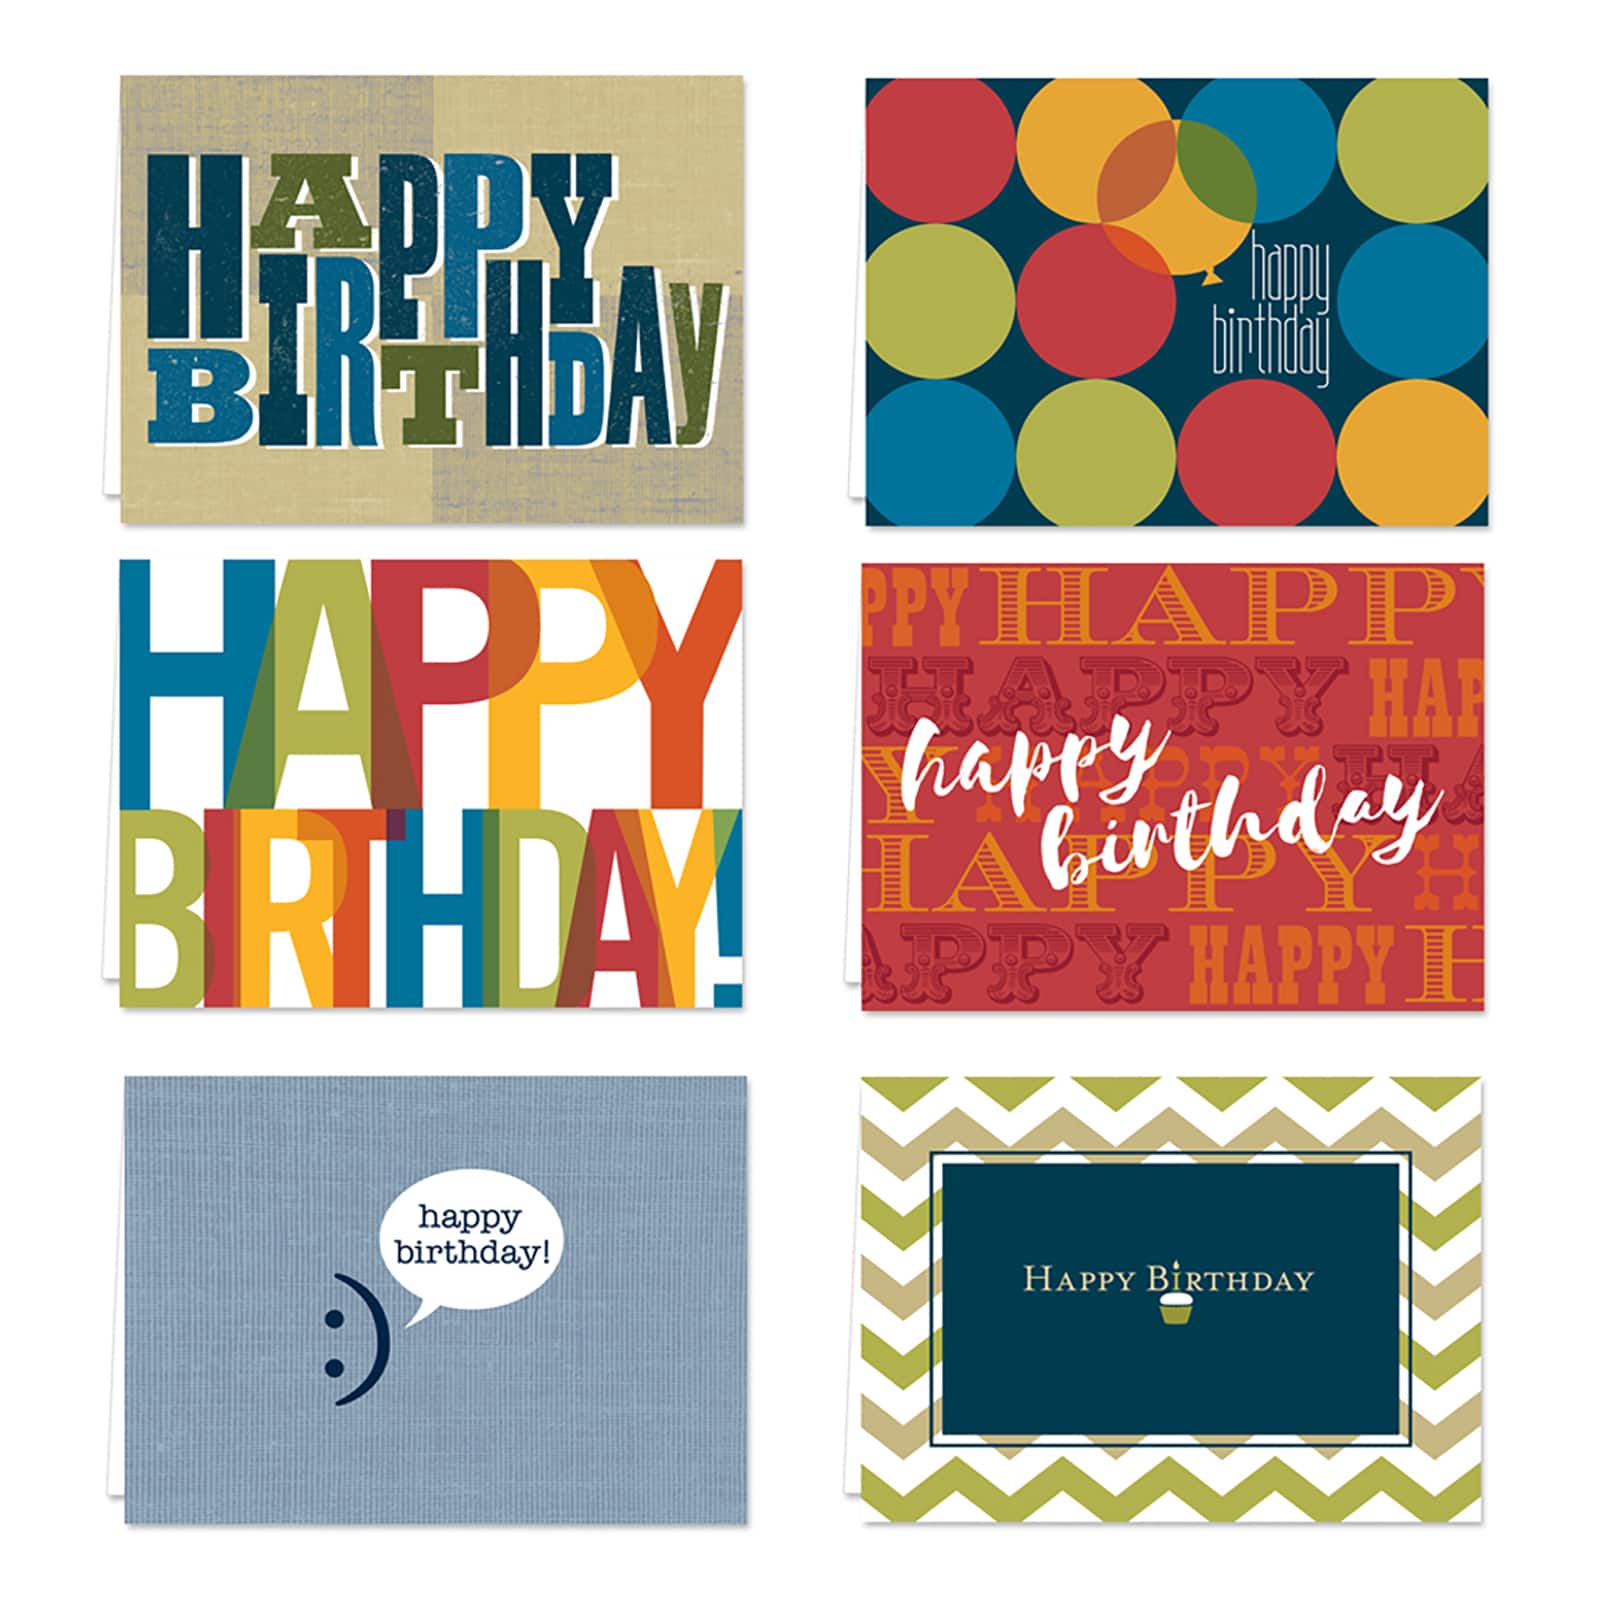 Buy the Hortense B. Hewitt Co. Snappy Happy Birthday Cards at Michaels.com